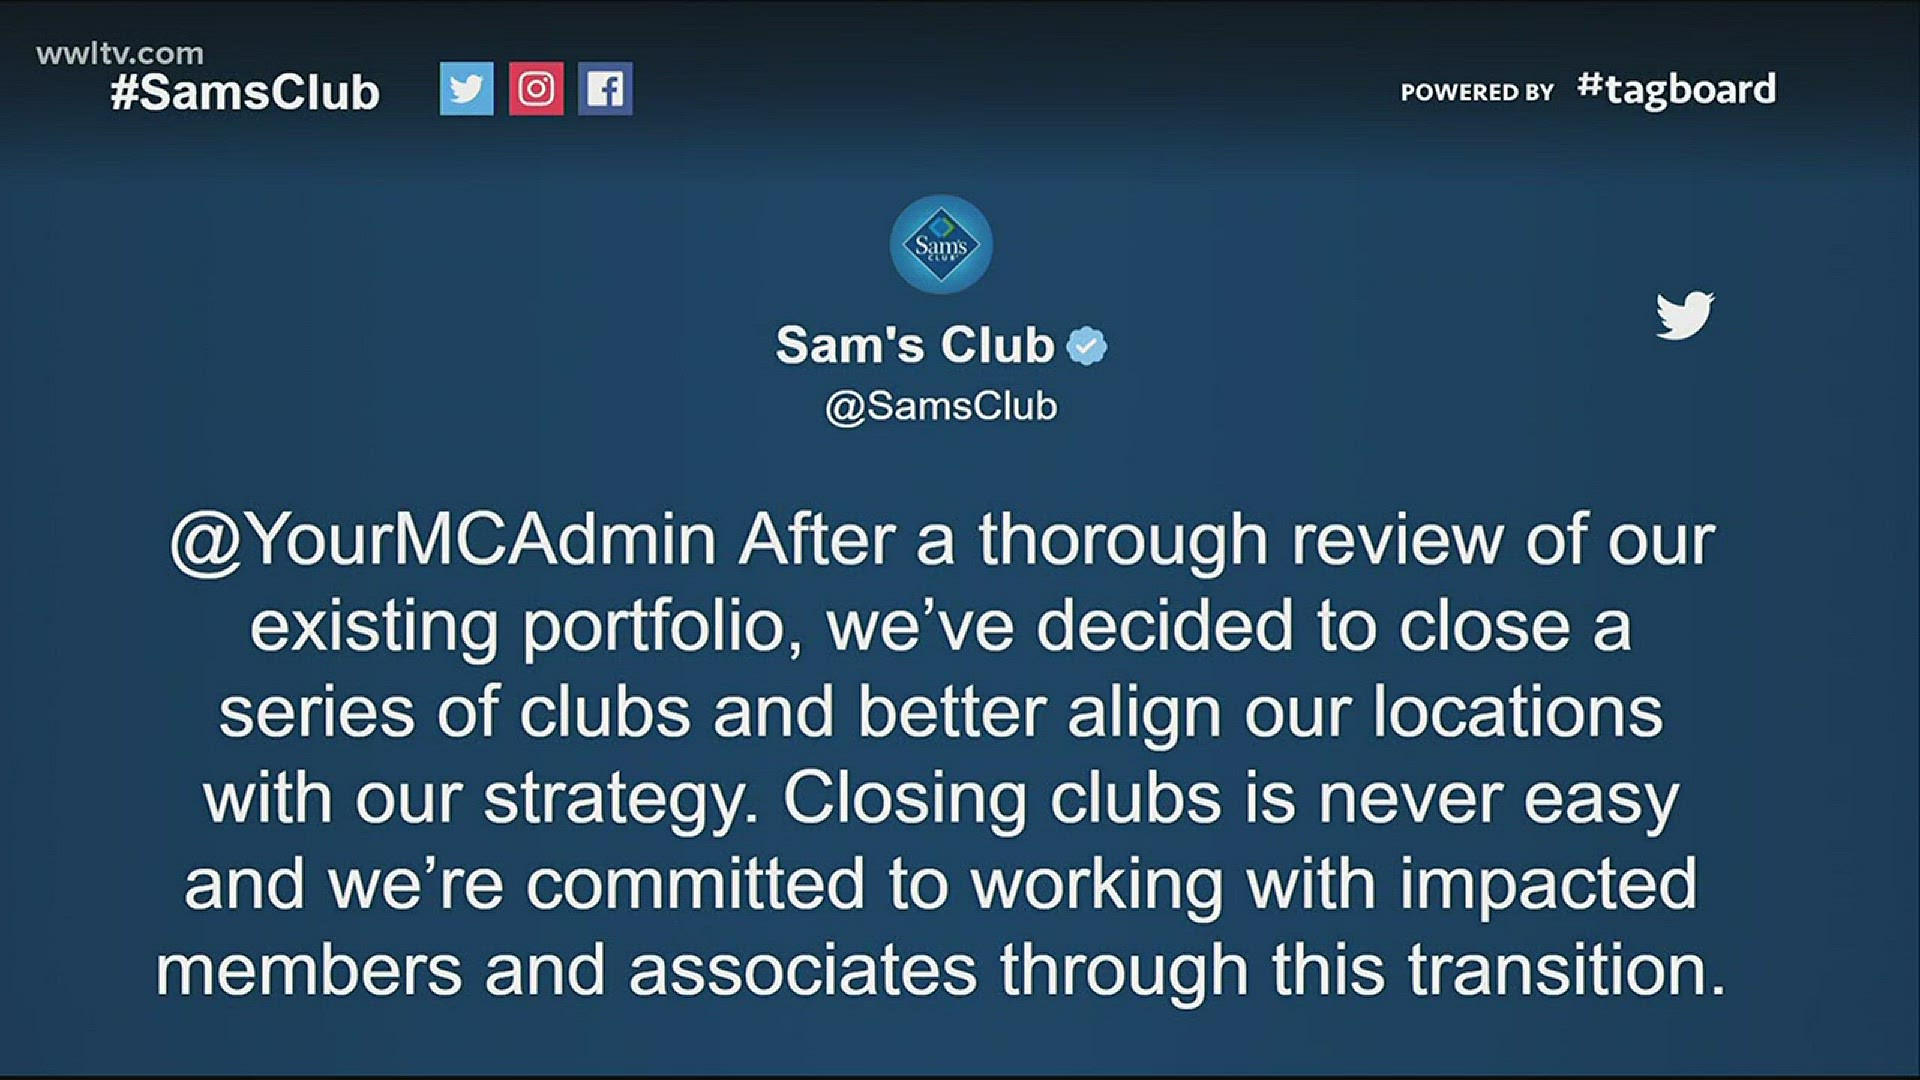 Several Sam's Club stores close without notice across nation